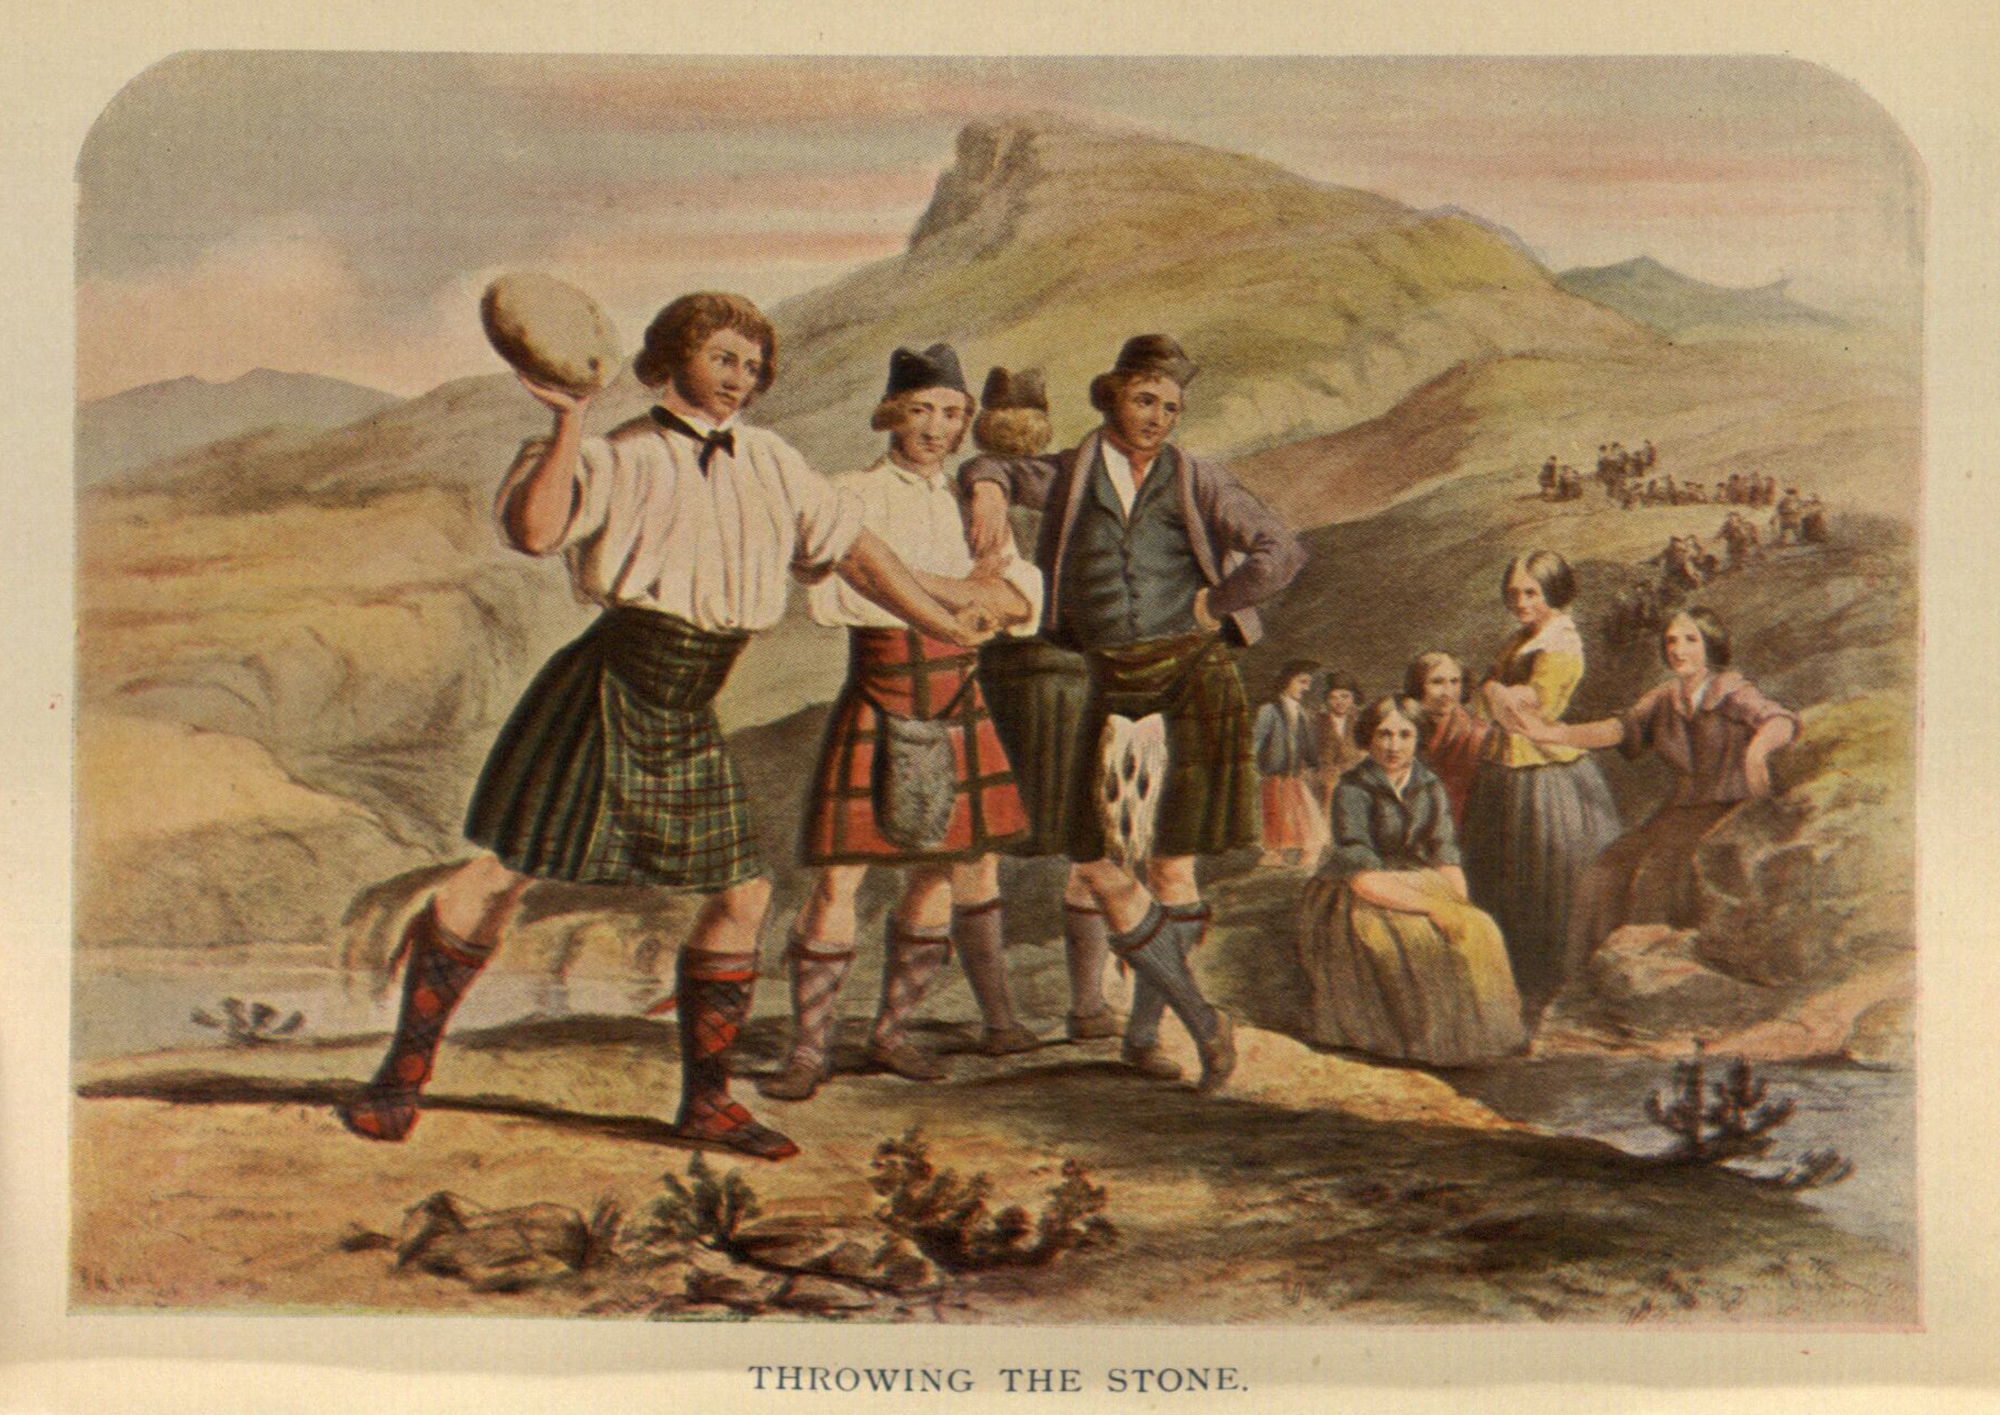 One of many unrealistic images of highlanders at work and play, in Gaelic Gatherings: The Highlanders at home, on the heath, the river, and the loch, by RR McIan (London 1848), Hen1.2.33